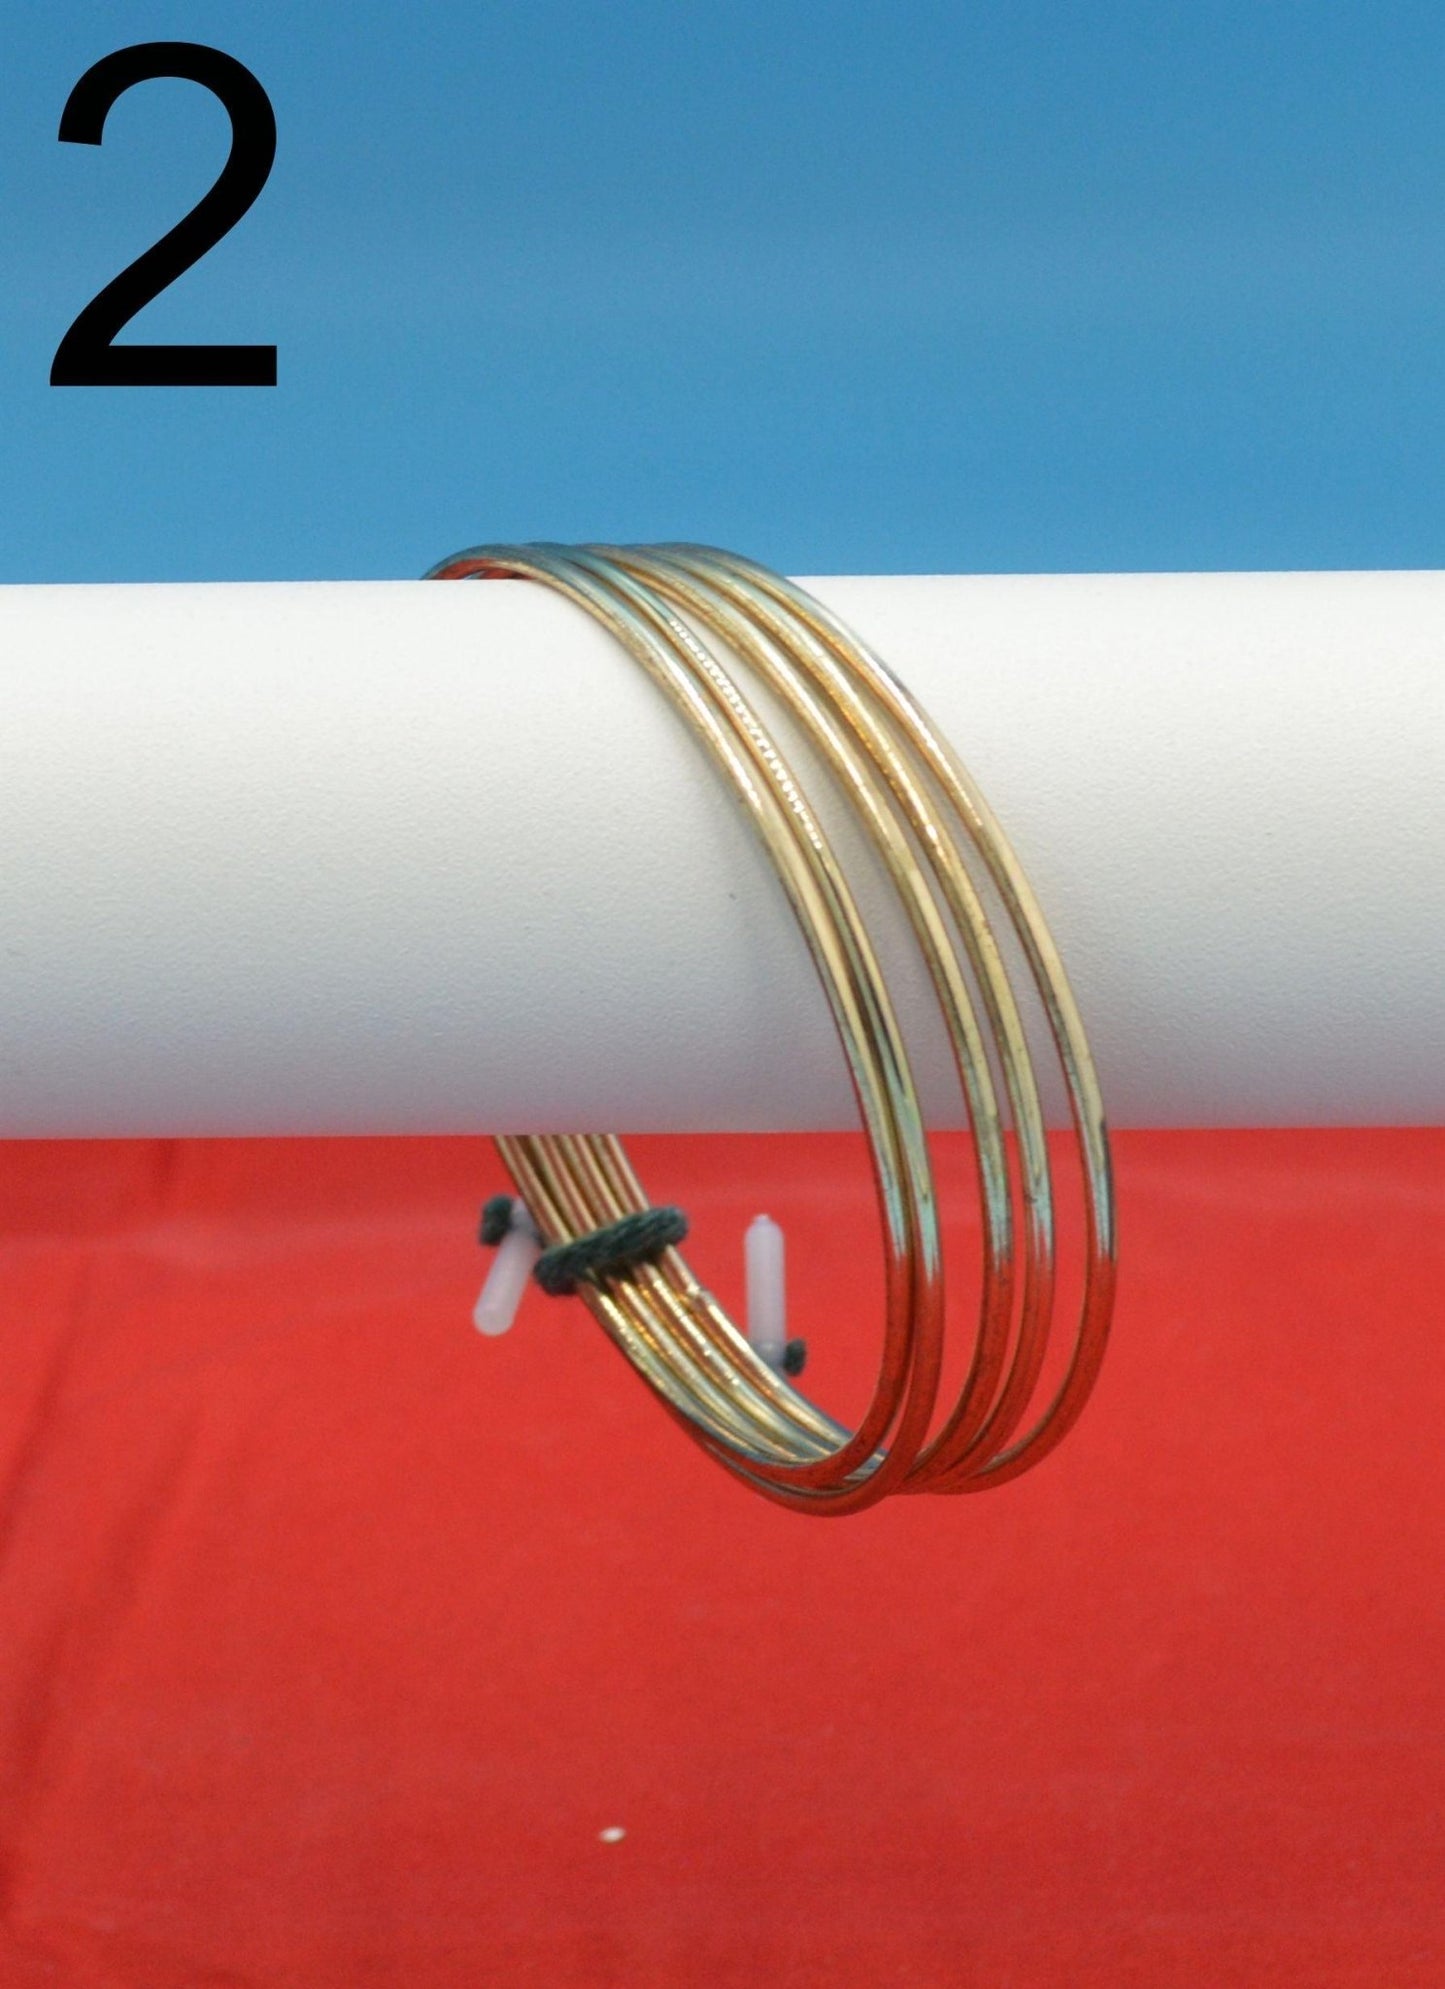 SIX METAL BANGLE BRACELET SETS TO CHOOSE FROM - TMD167207